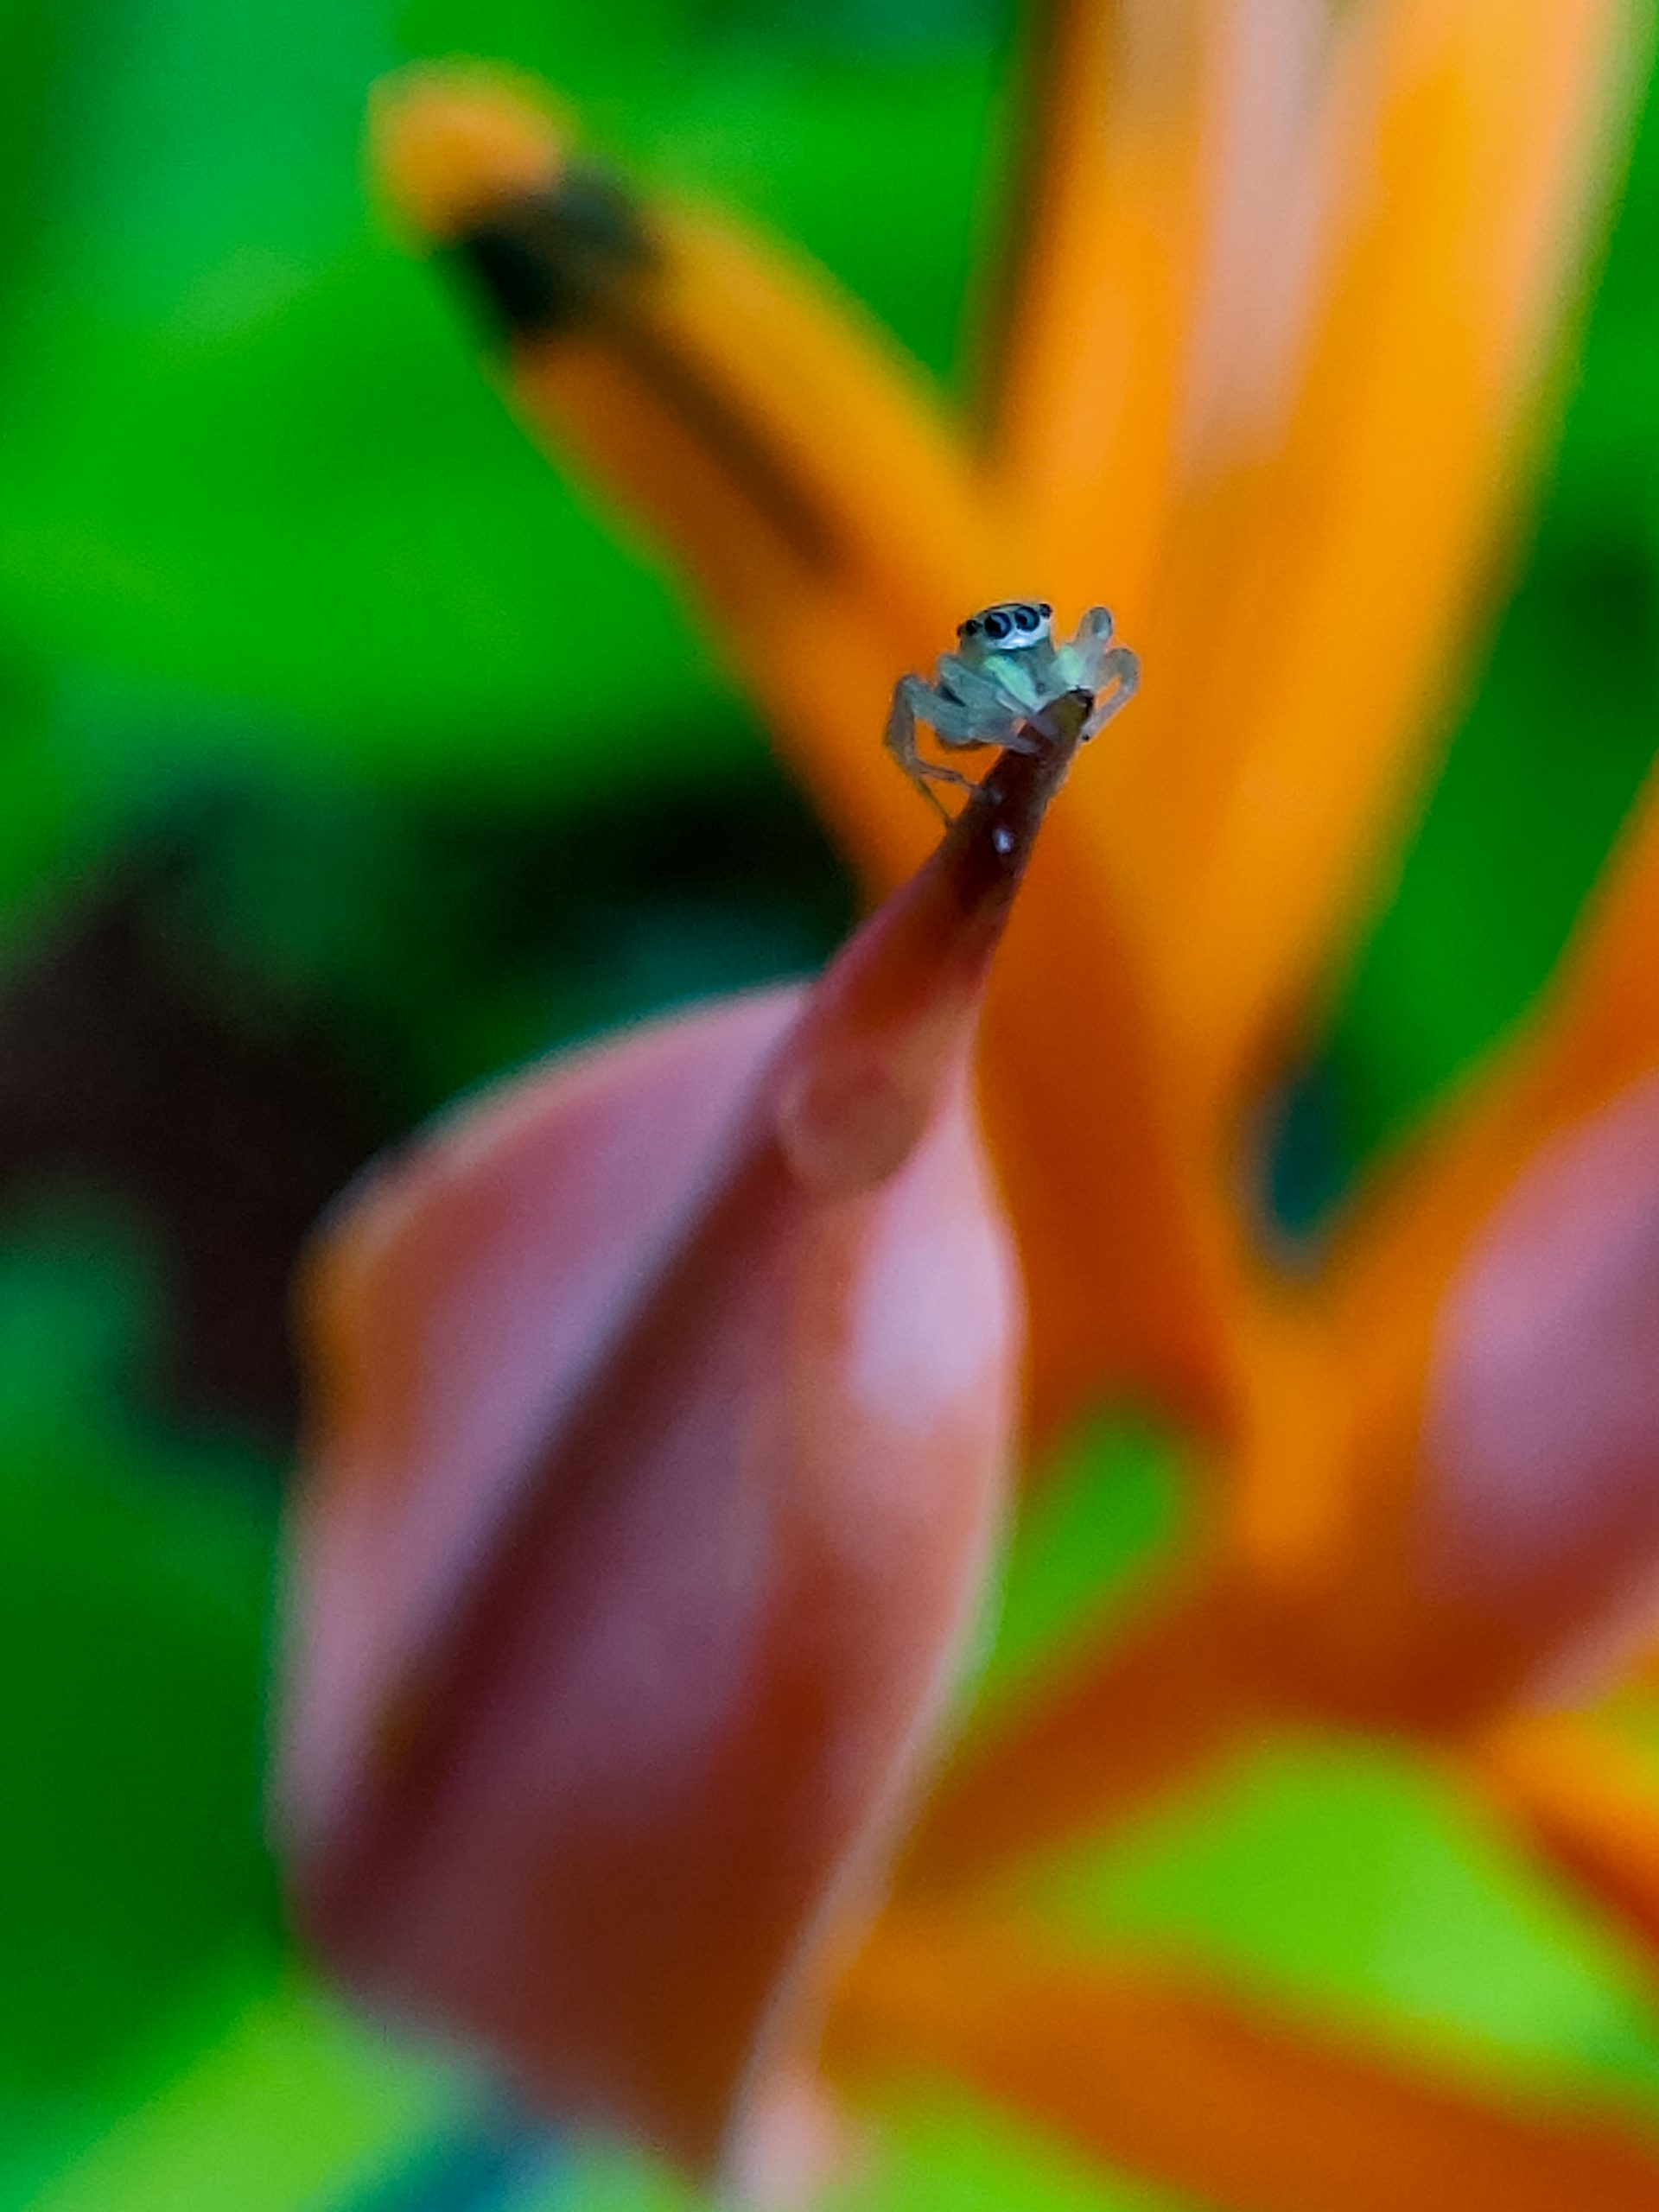 A spider on a flower bud